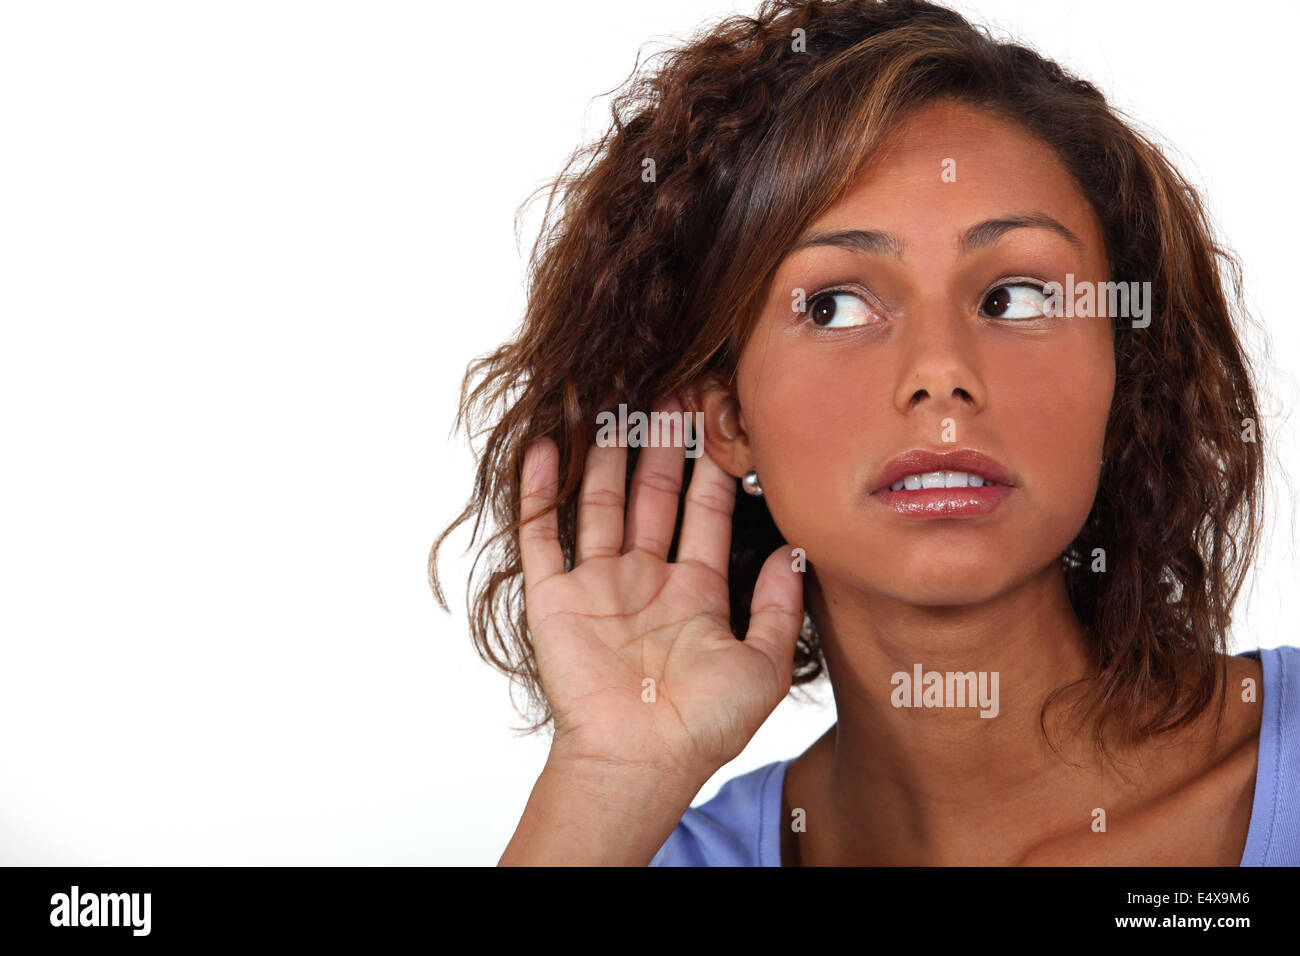 Woman holding hand to ear Stock Photo